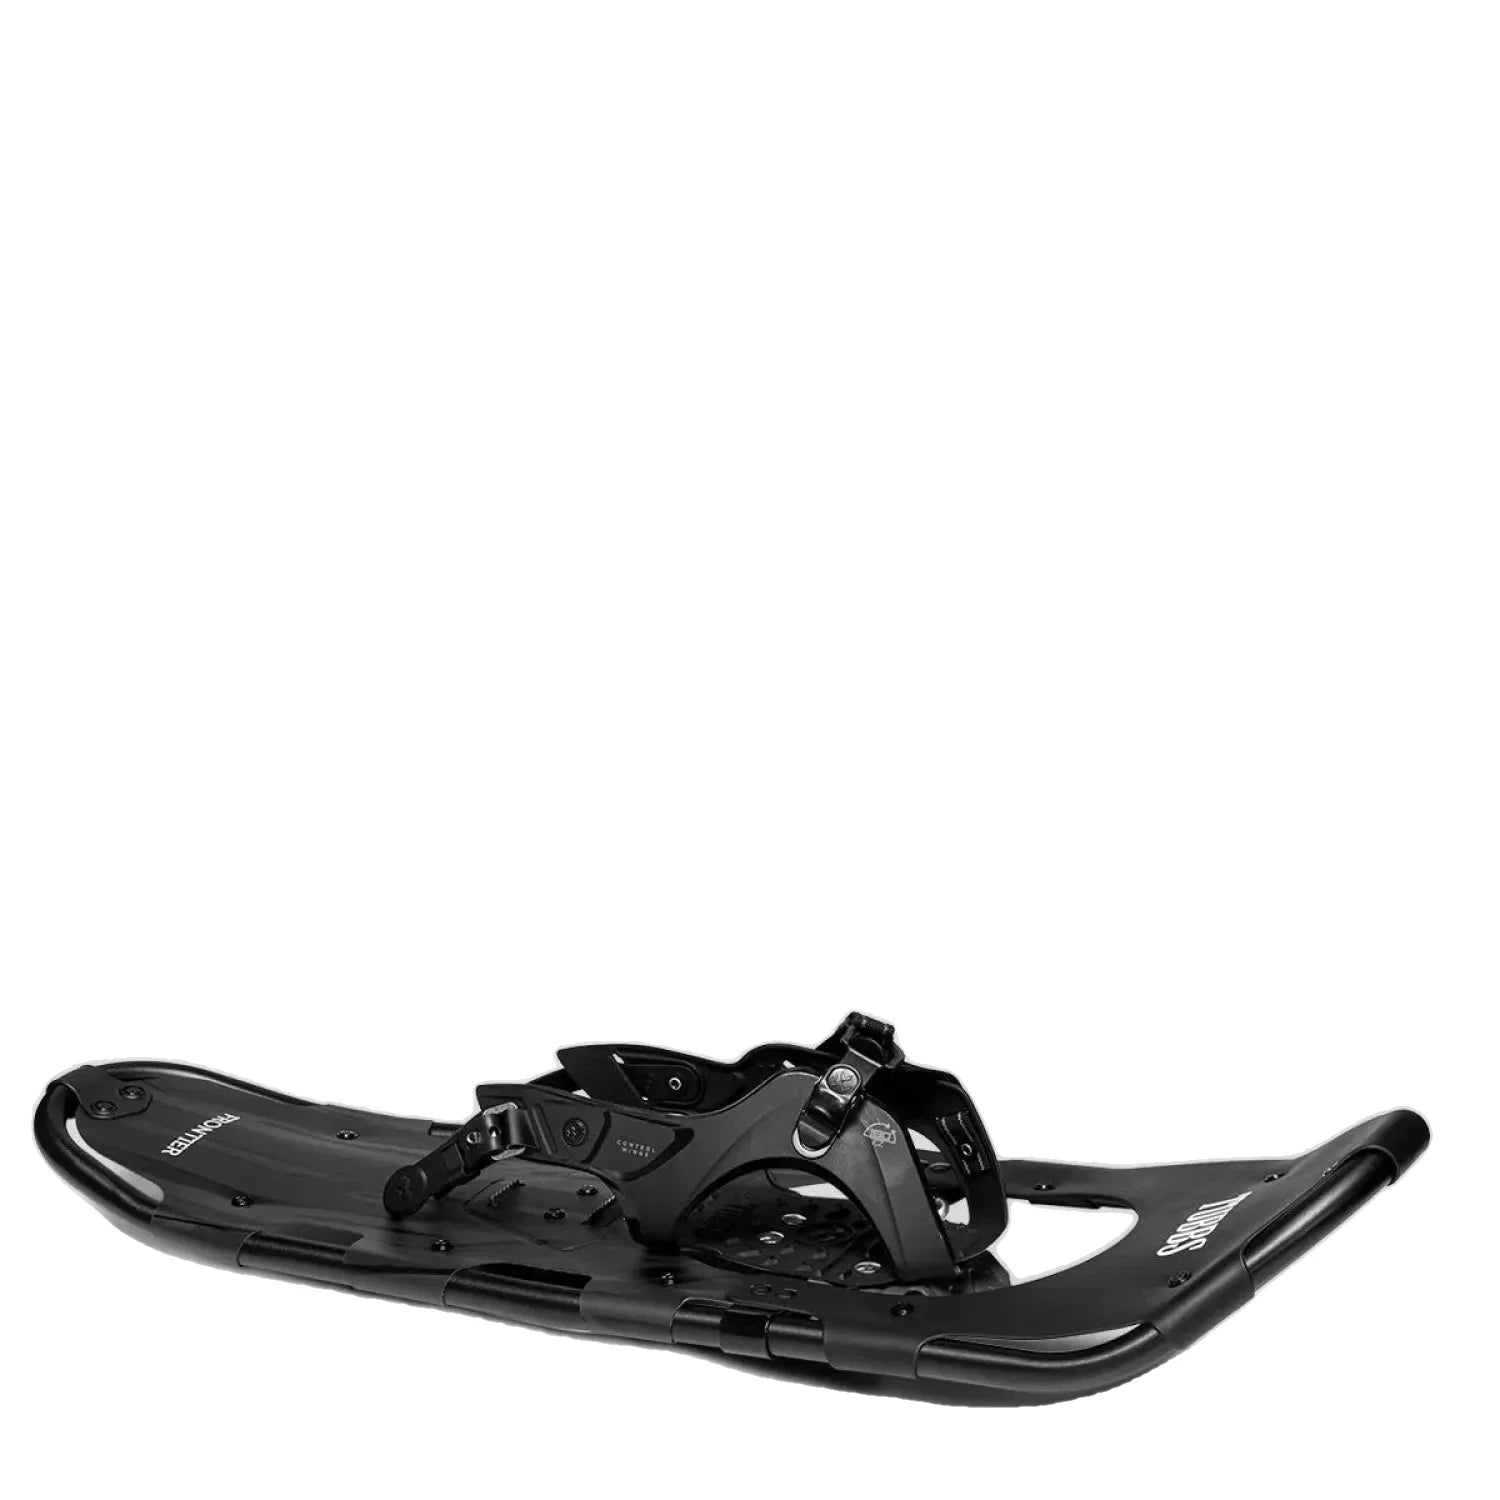 Tubb's Frontier 30 snowshoe in black, side view.